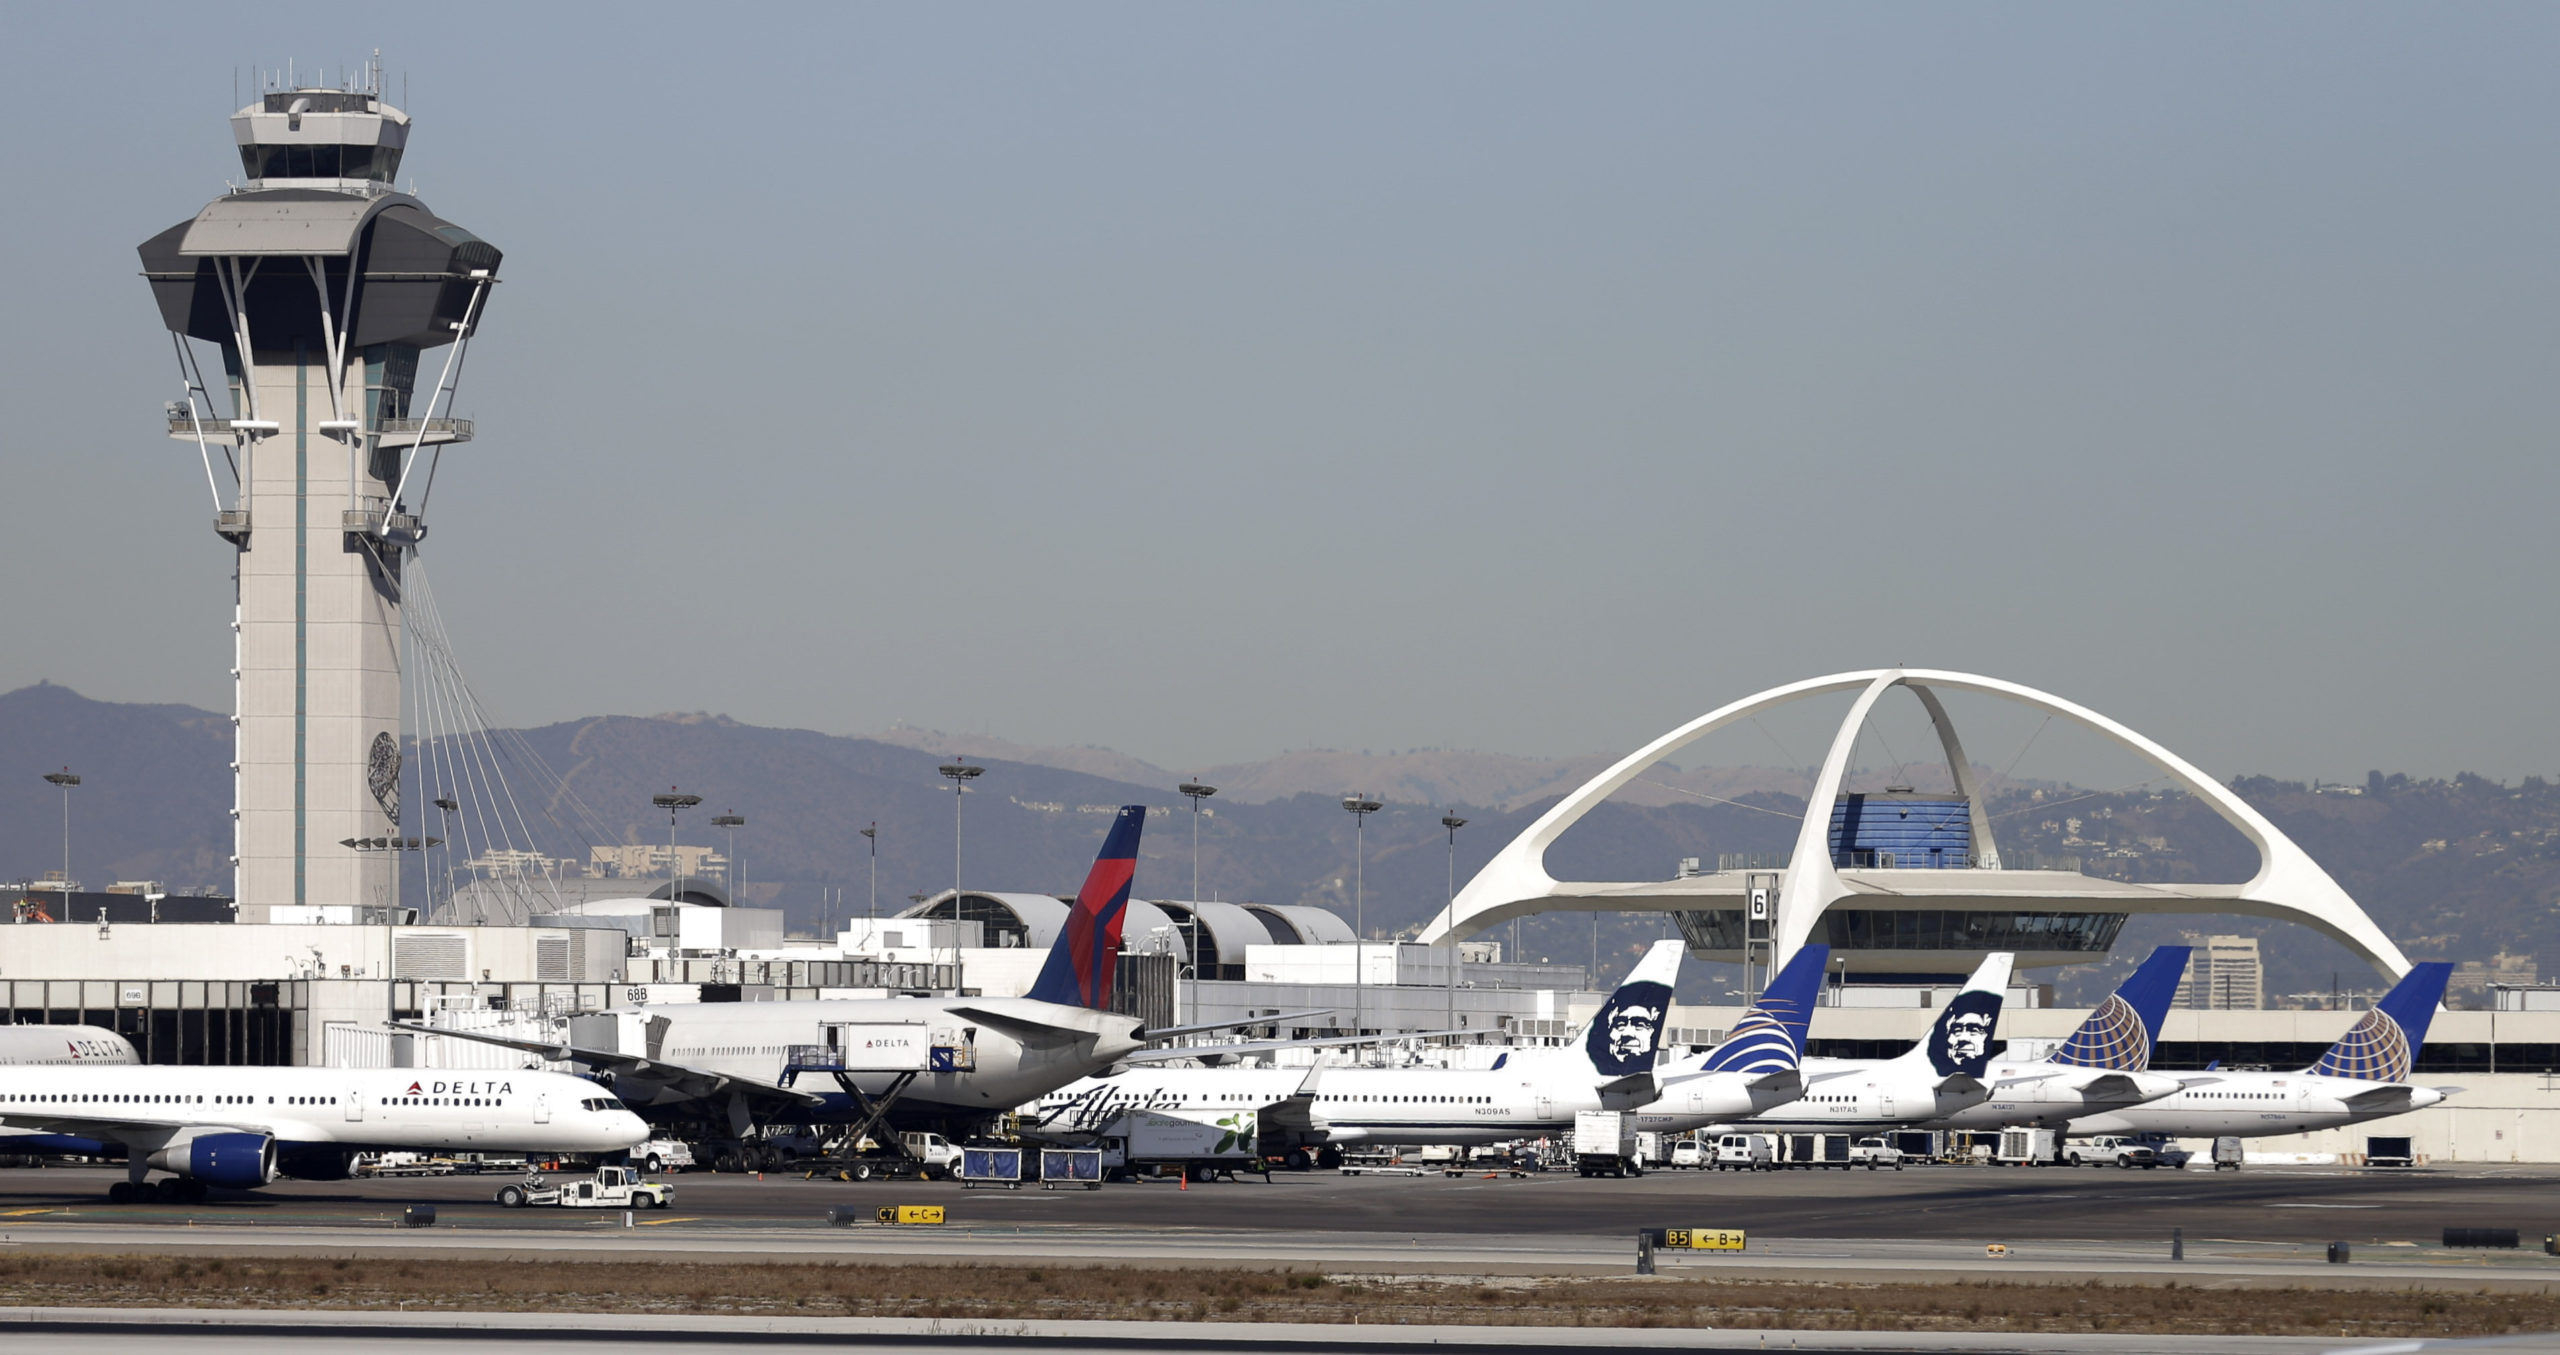 Airplanes sit on the tarmac at Los Angeles International Airport in a file photo from November 2013.